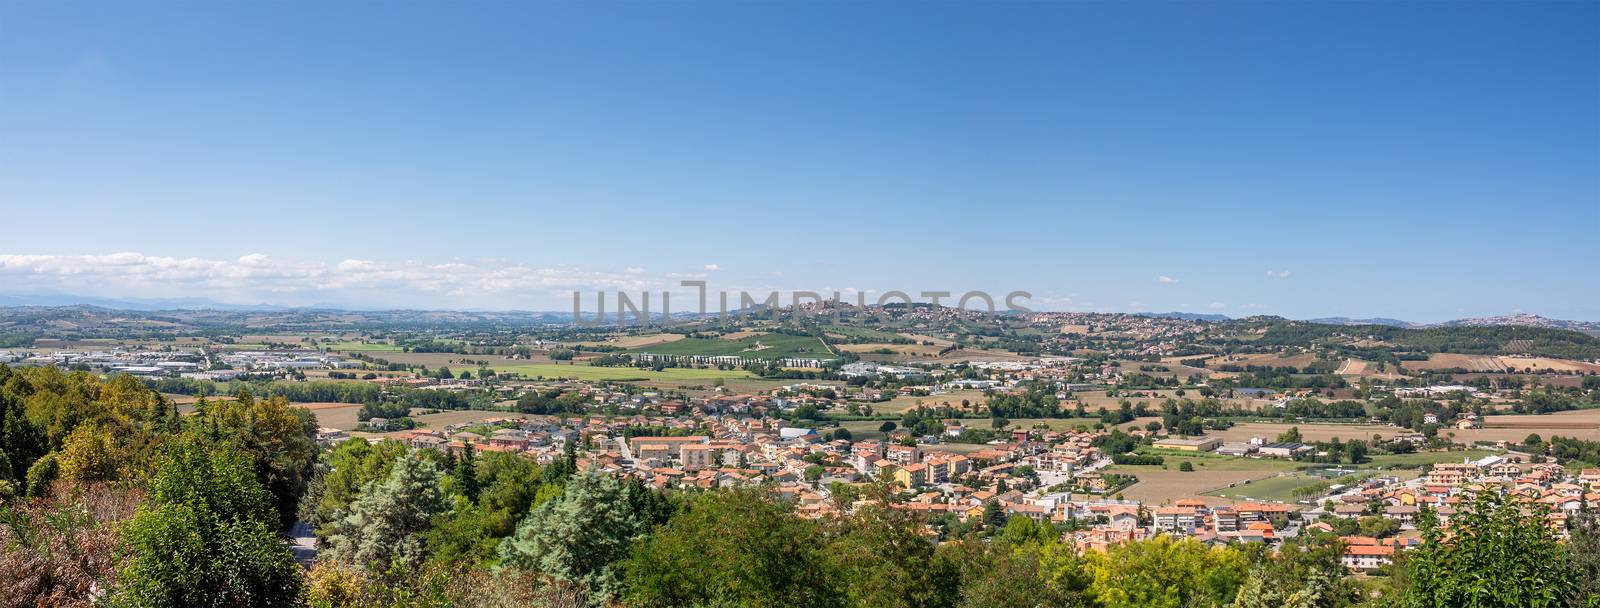 An image of a panoramic scenery in Italy Marche